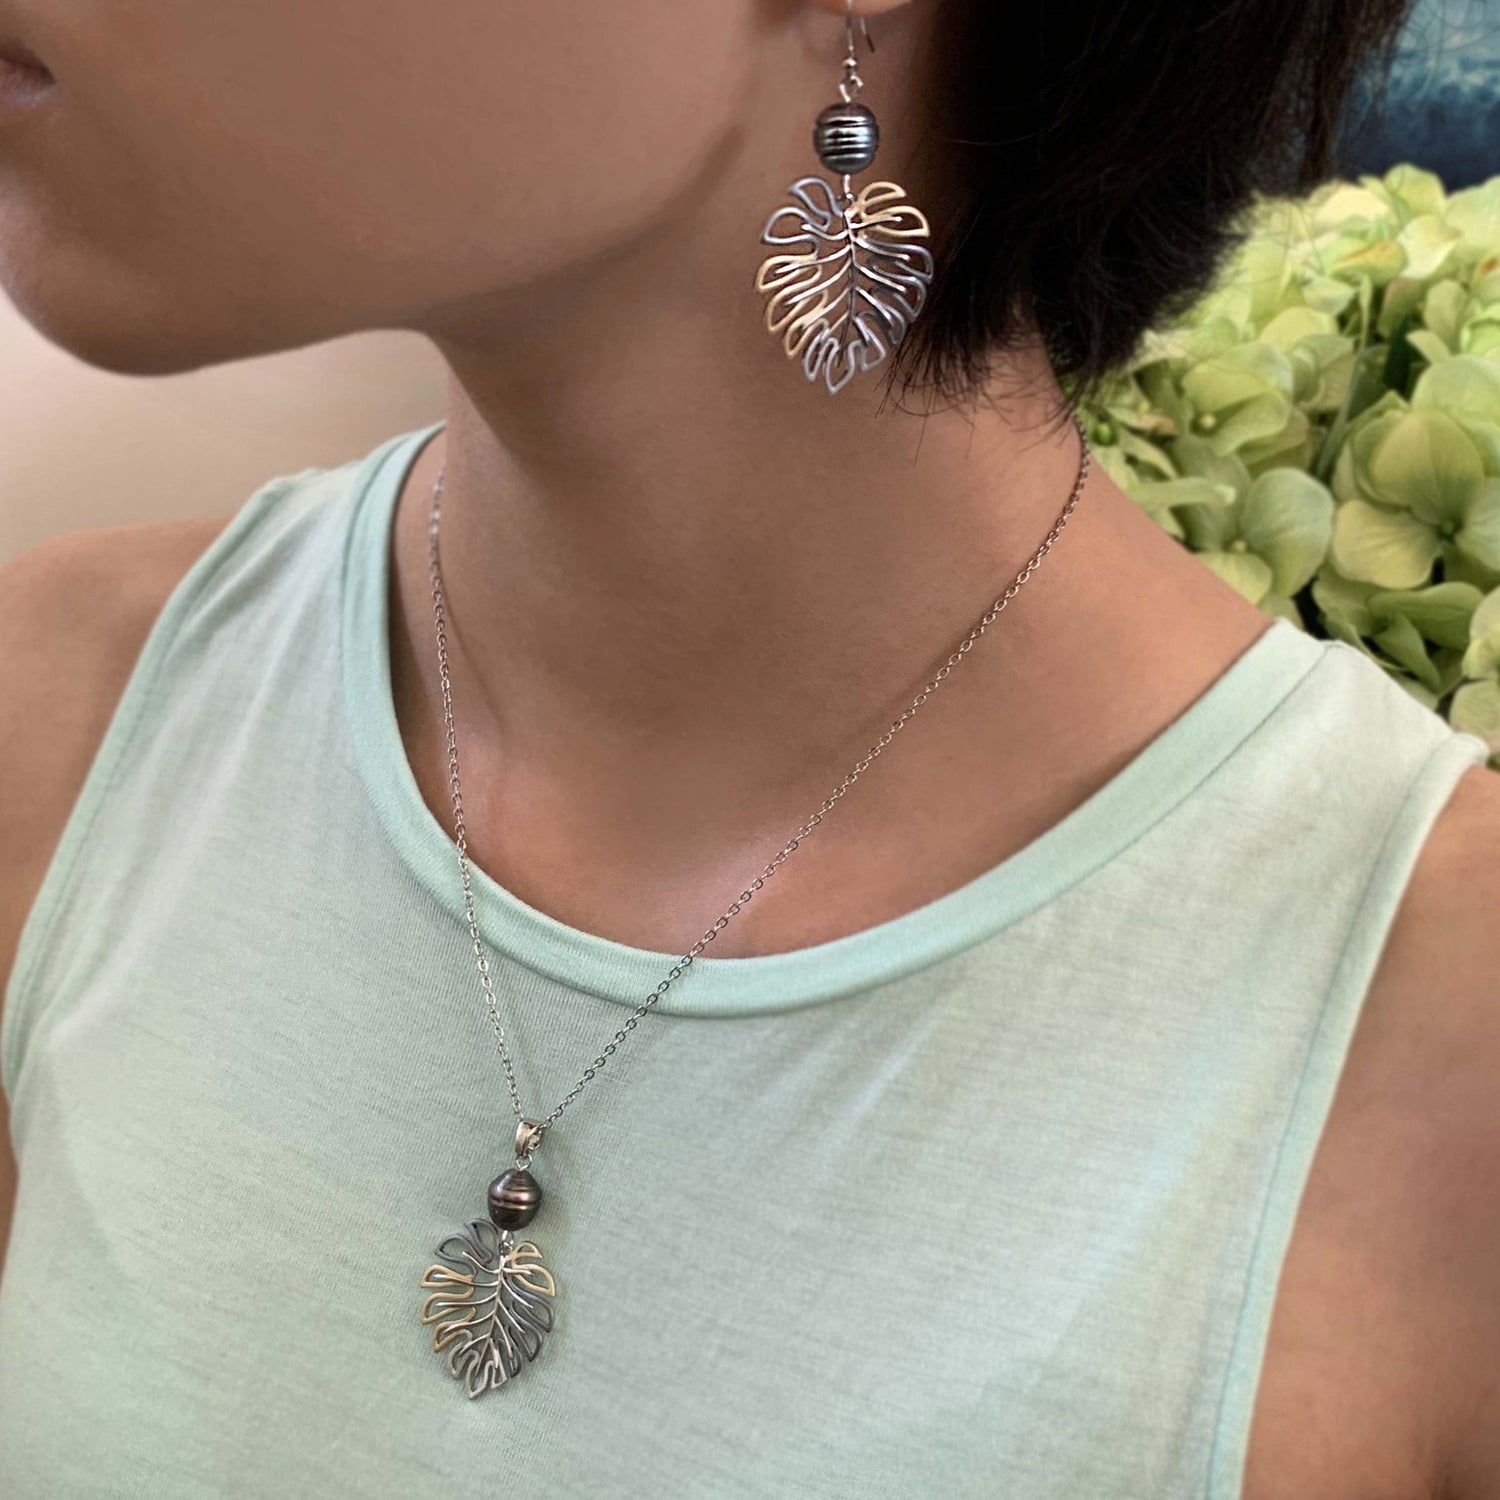 Monstera pearl pendant shown on model with earrings.